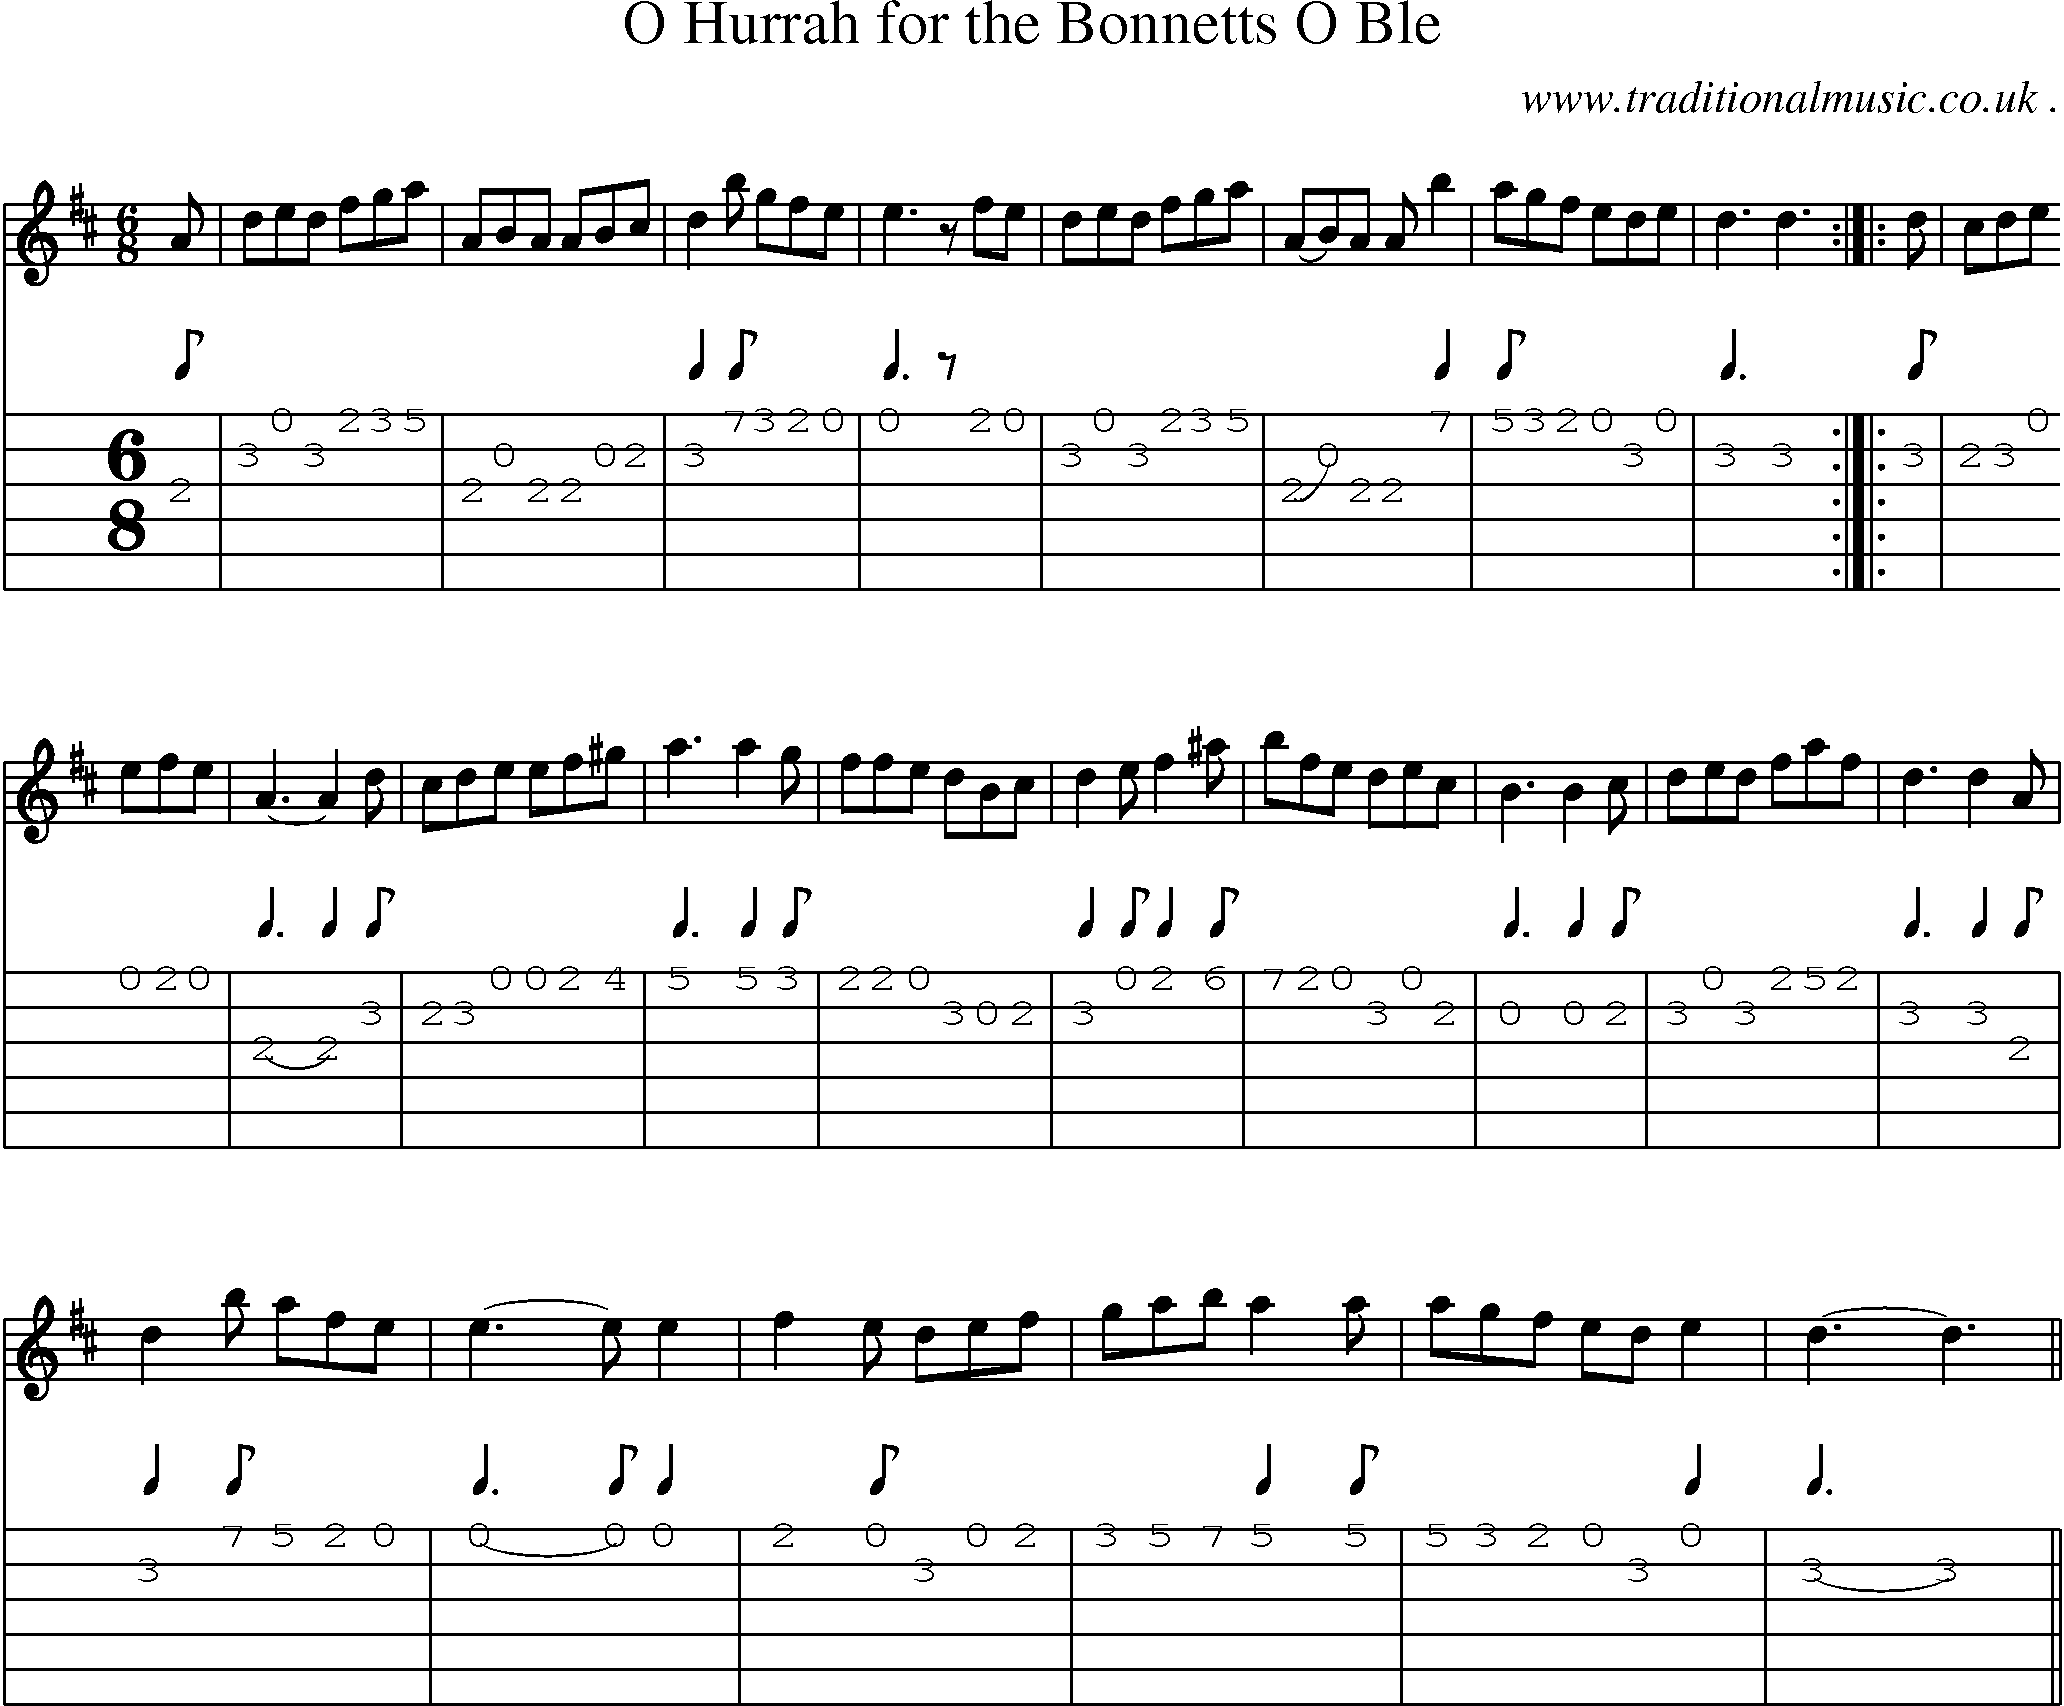 Sheet-Music and Guitar Tabs for O Hurrah For The Bonnetts O Ble